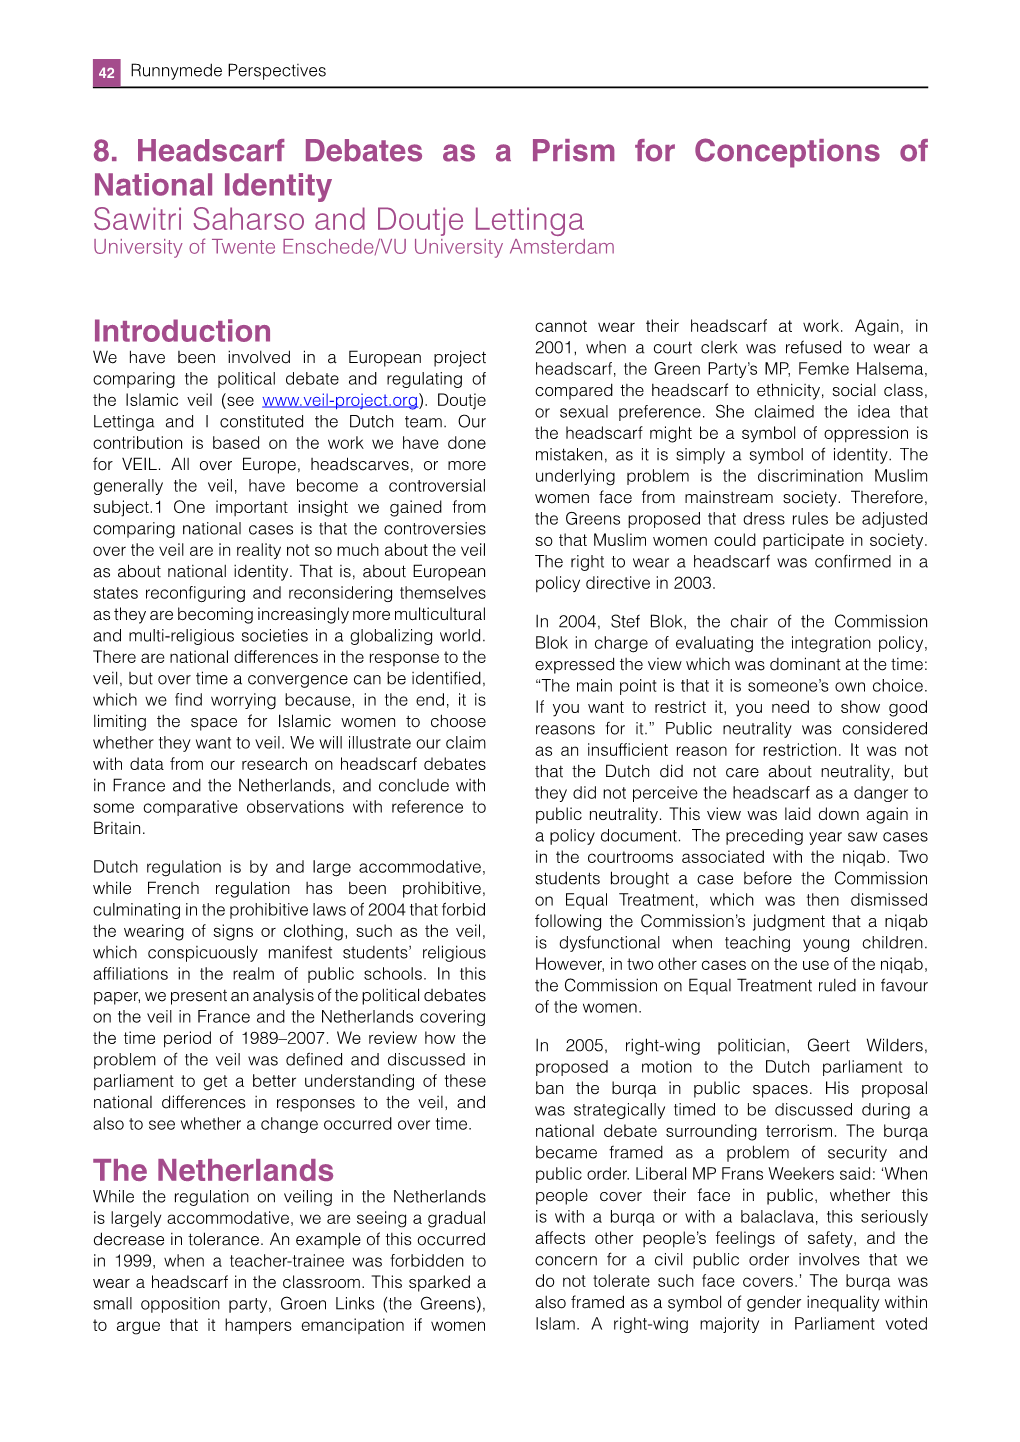 Introduction the Netherlands 8. Headscarf Debates As a Prism For